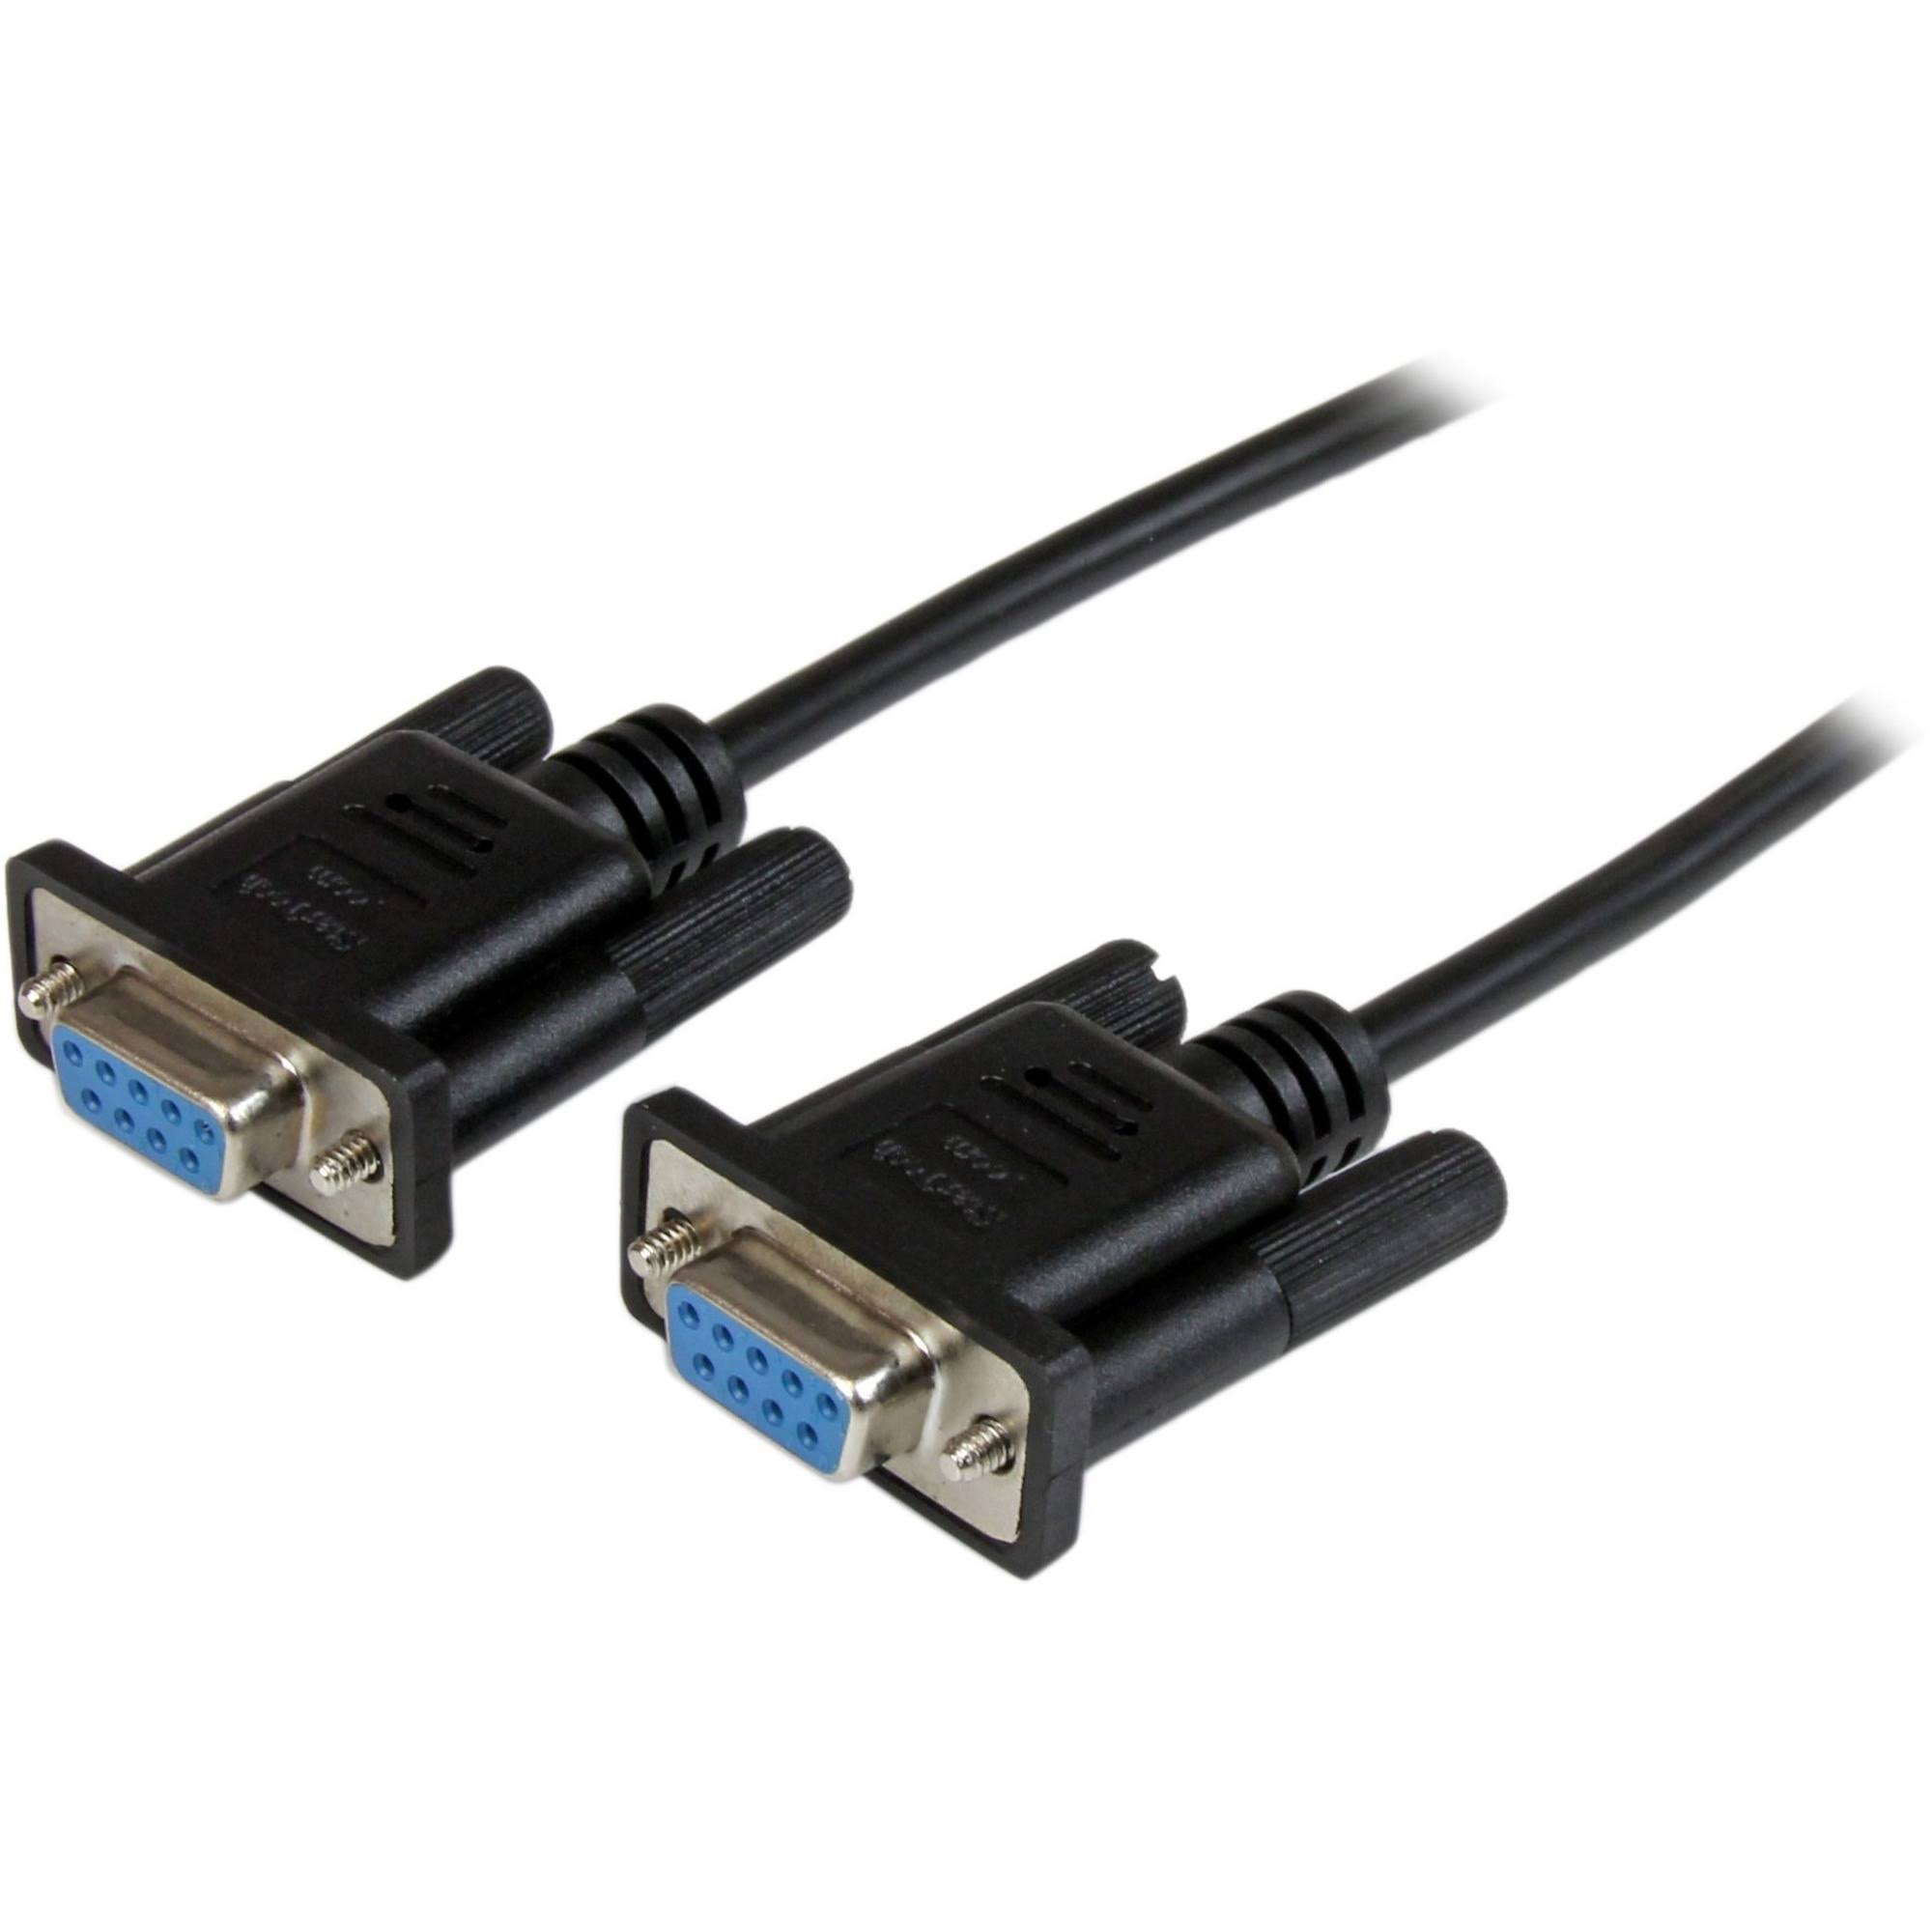 StarTech DB9 RS232 Serial Null Modem Cable - Black, F/F, 2m